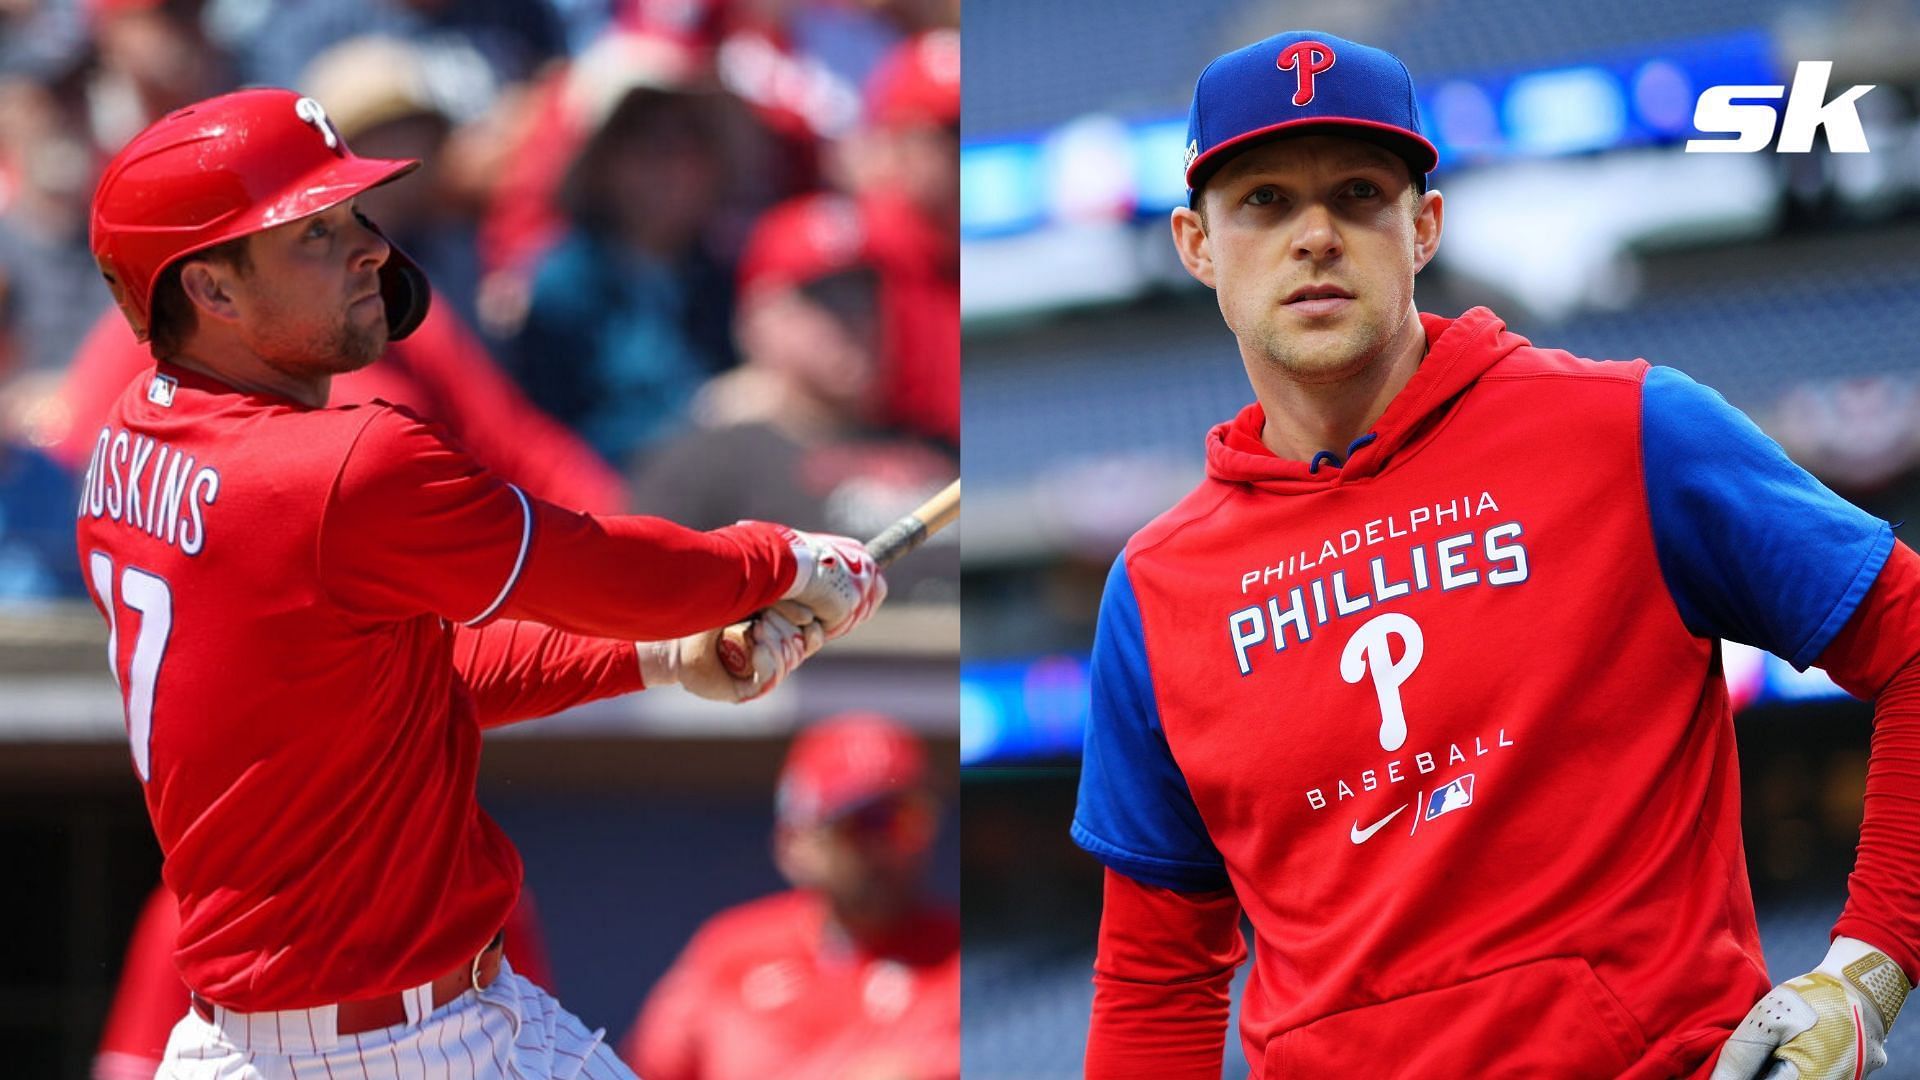 Rhys Hoskins could find himself with plenty of free agent options this offseason